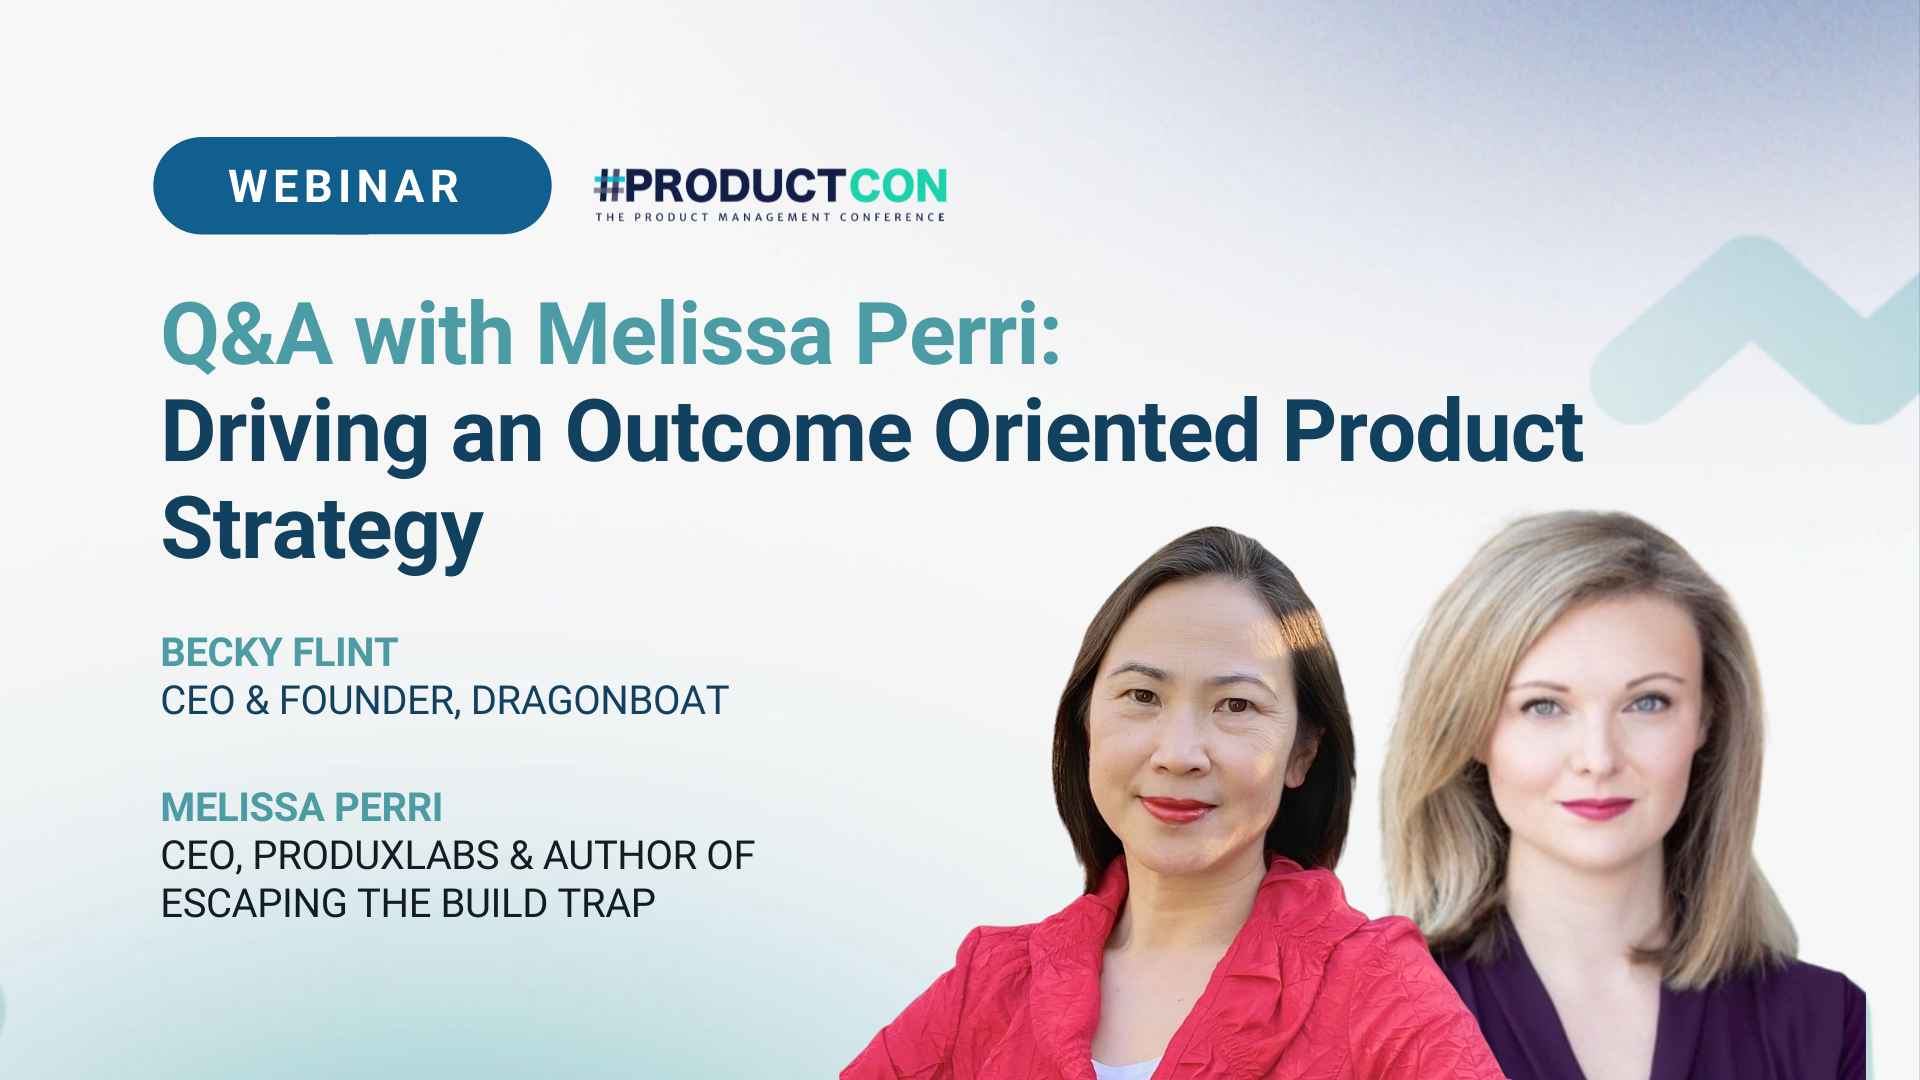 Q&A with Melissa Perri: Driving an Outcome Oriented Product Strategy